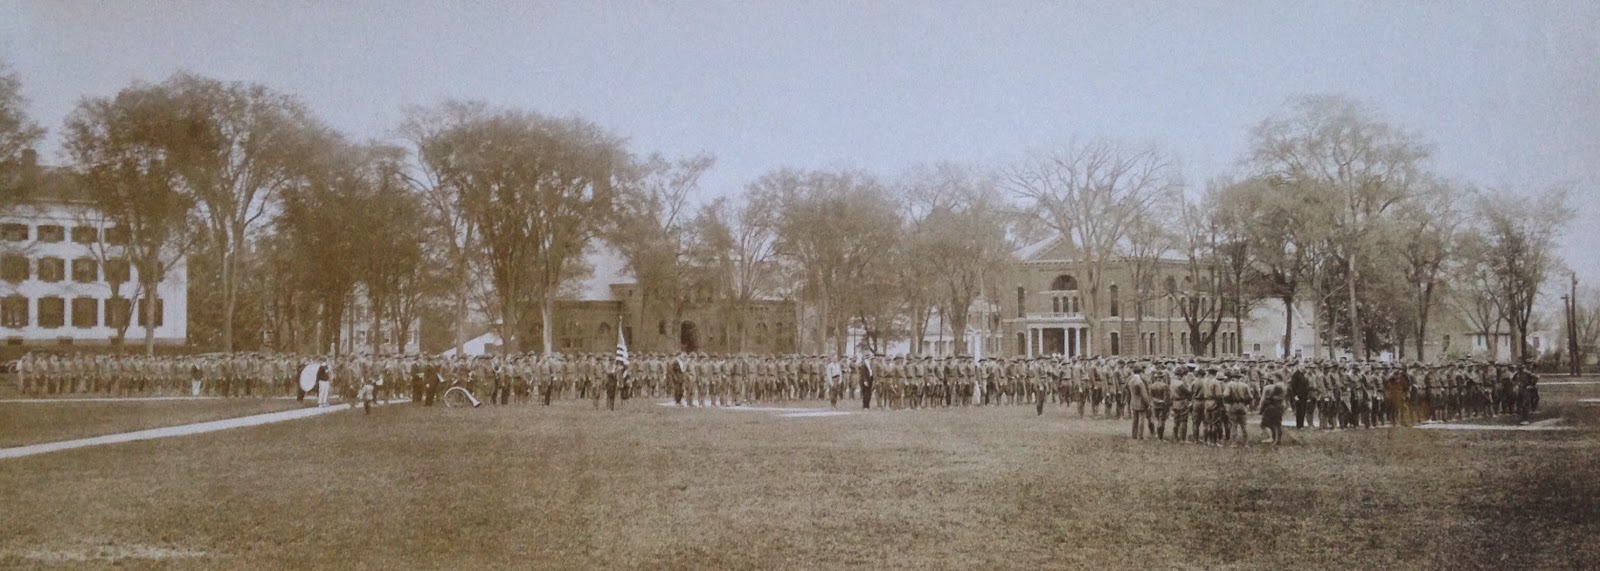 A photograph from a parade on campus.